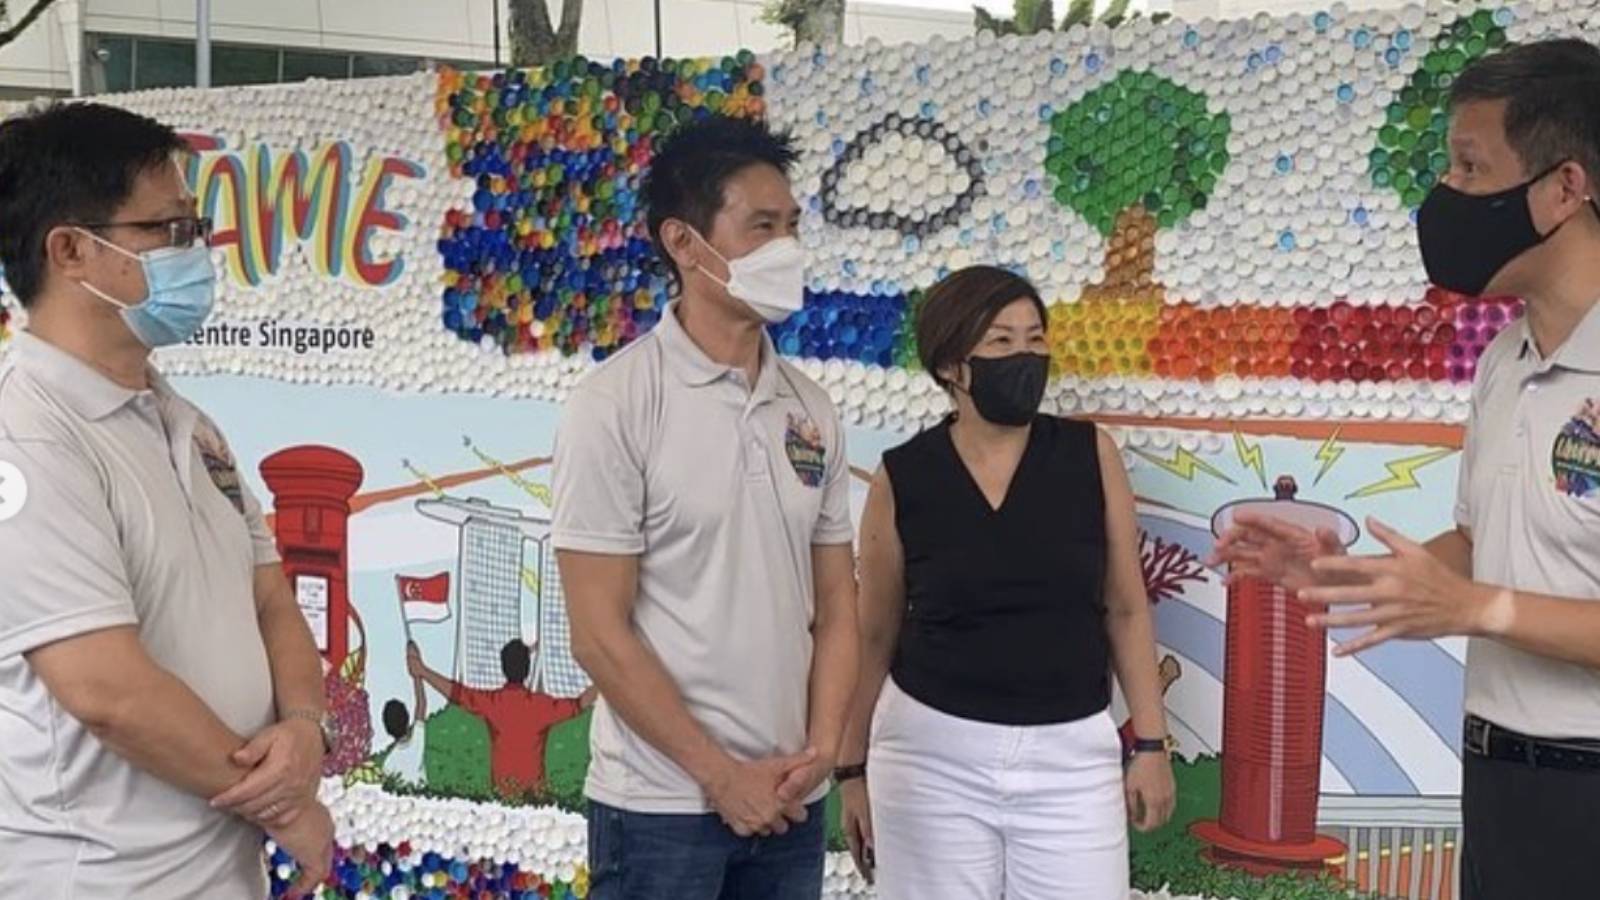 Edmund Chen [second from left] in-front of his bottle cap mural